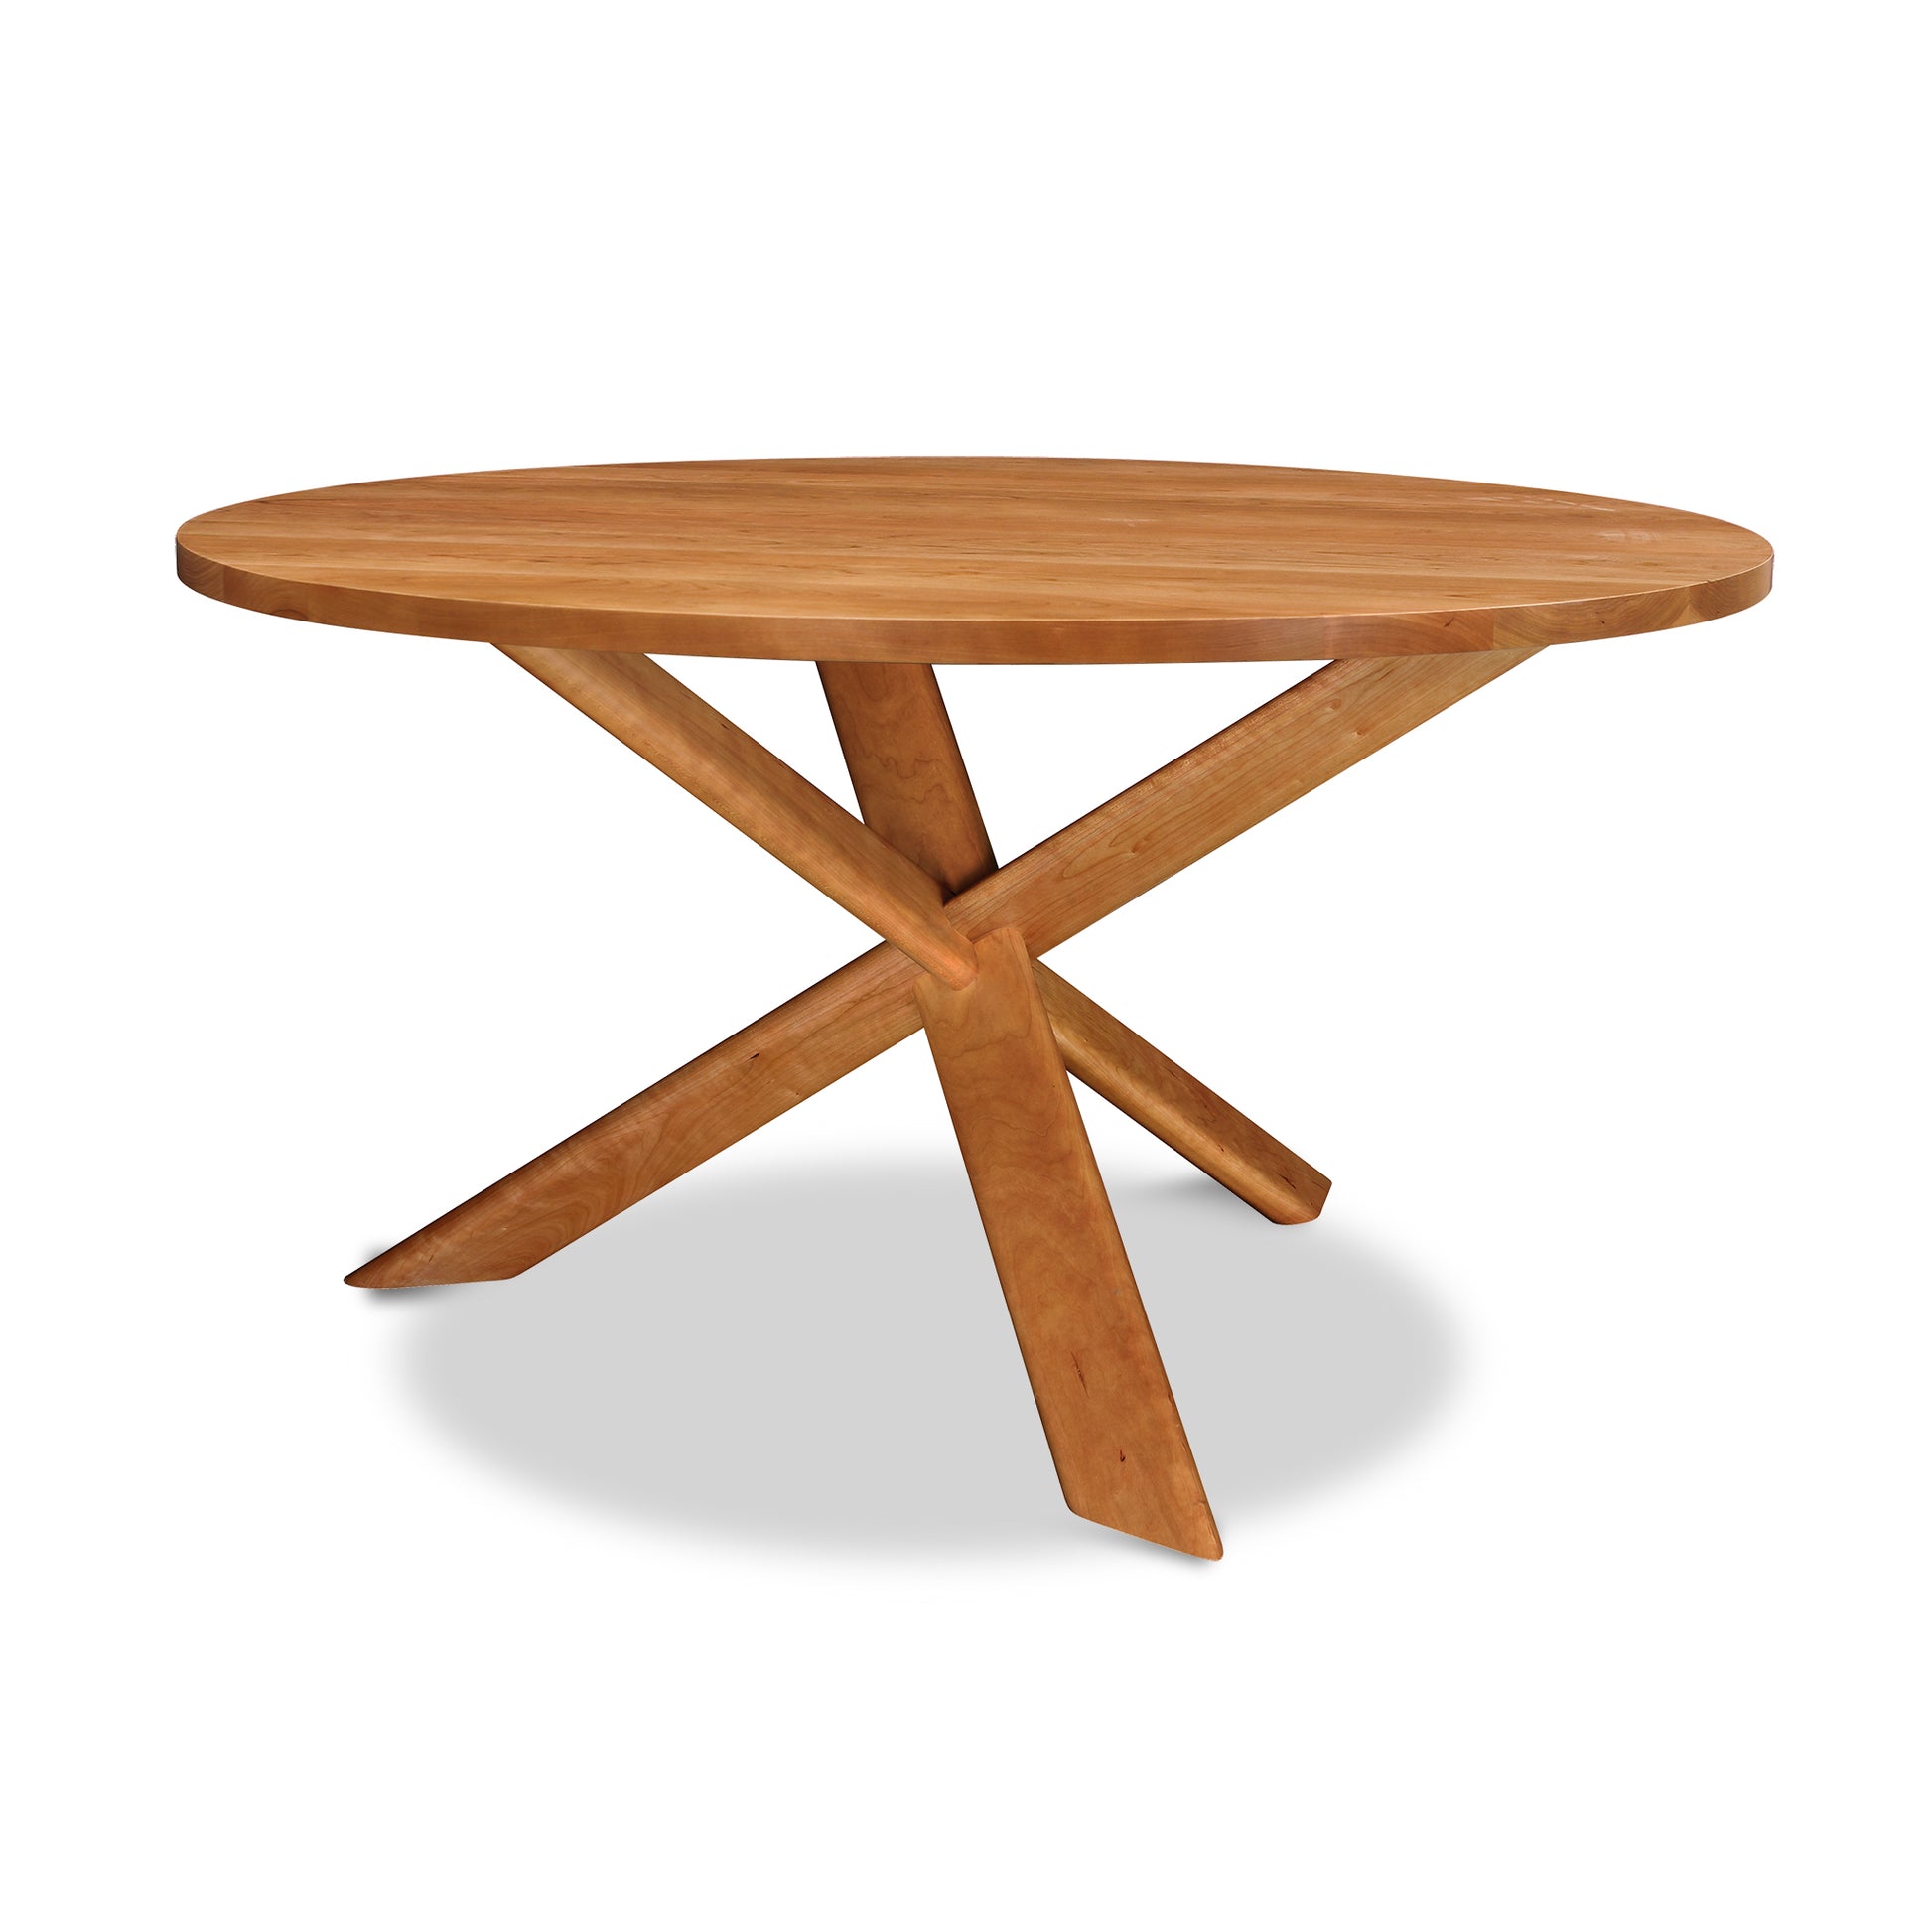 A round wooden Junction Solid Top Table with crossed legs, perfect for a dining area, made by Lyndon Furniture.